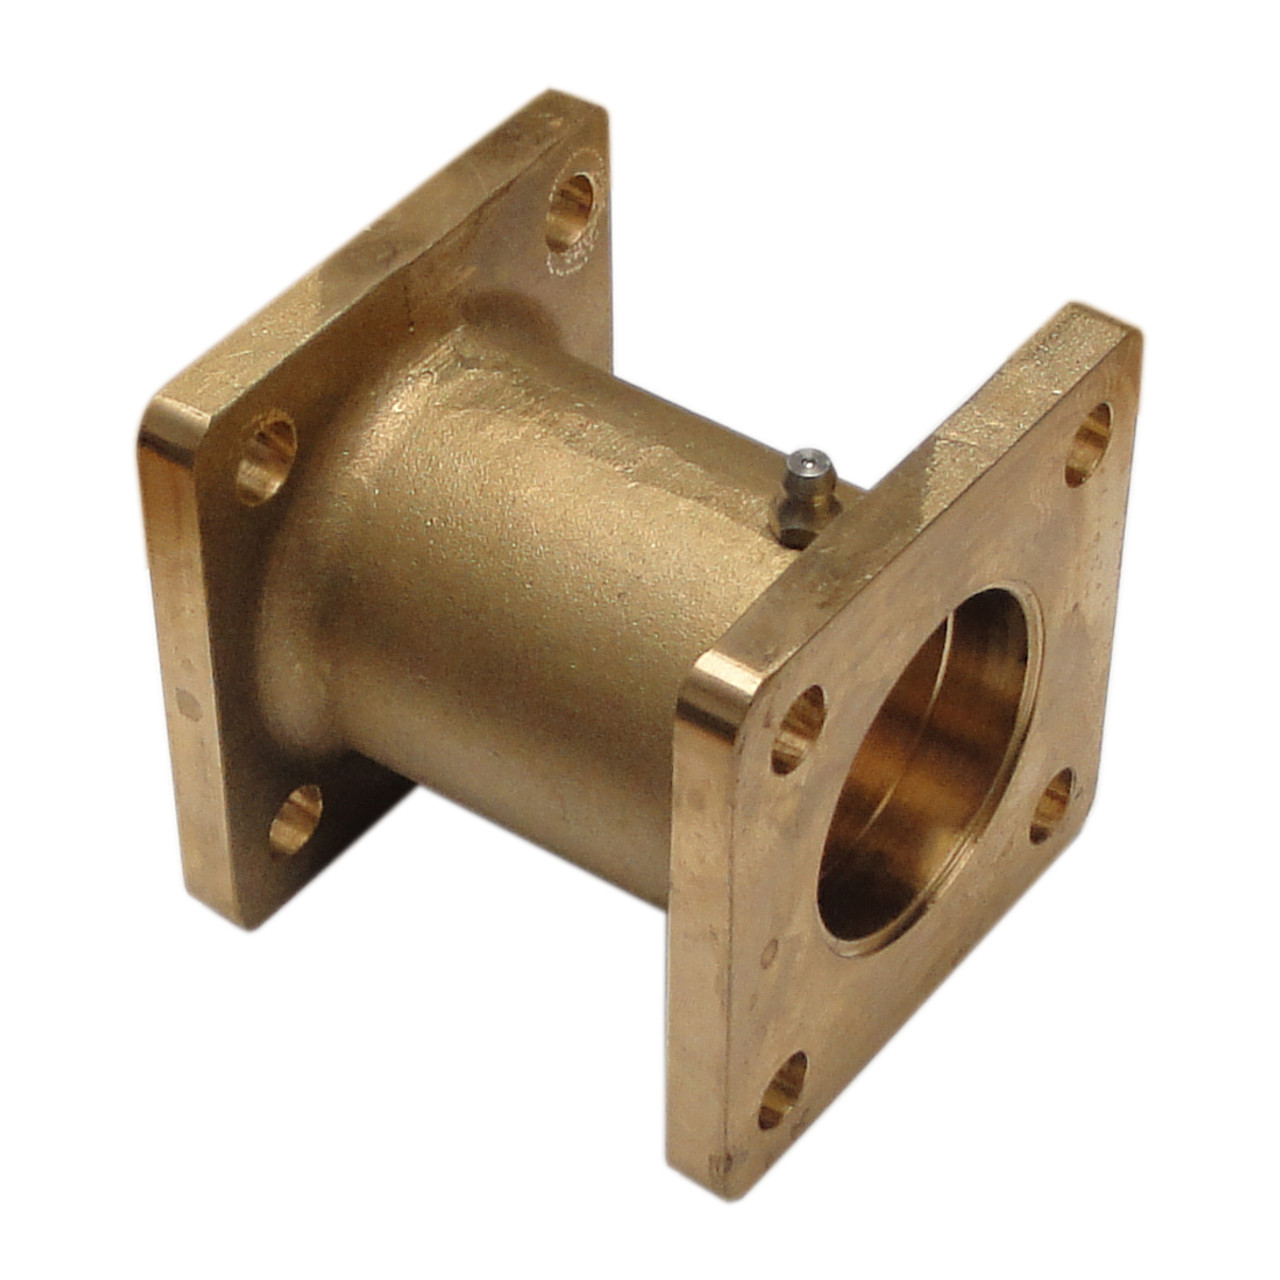 Kolstrand Enclosed Coupling Protector for Nylon & Brass Gurdy